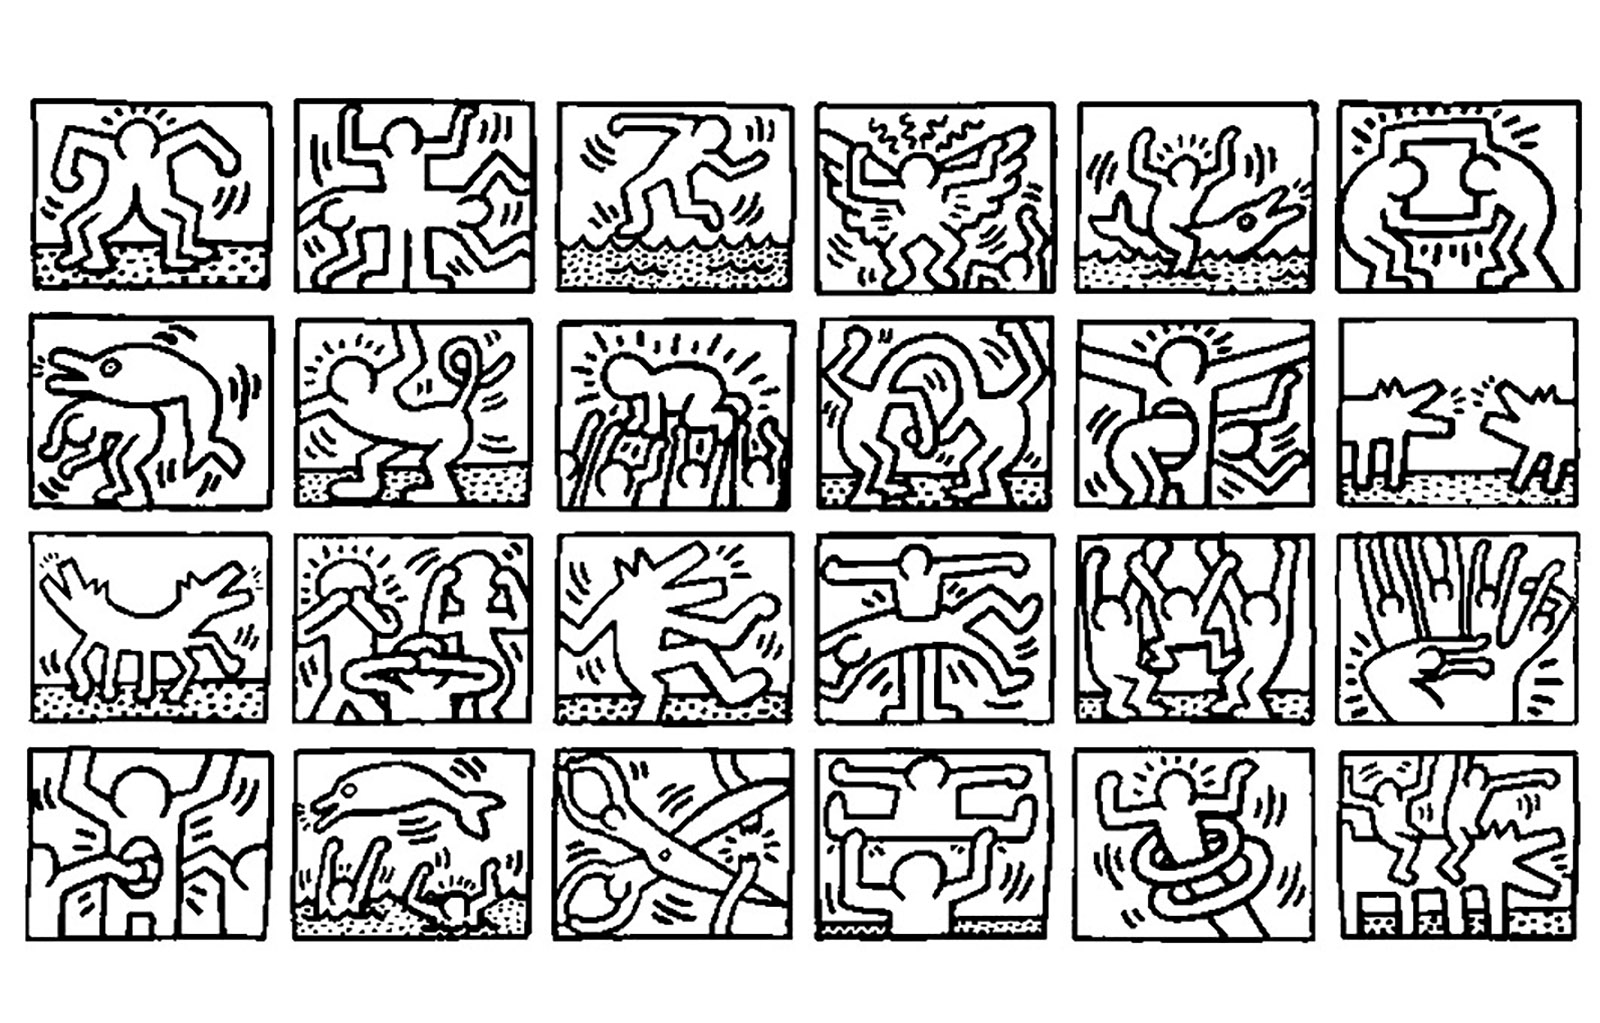 Mosaic of several works by Keith Haring. Did you know? Haring began drawing with white chalk on empty black billboards (intended for advertising) in subway stations. Haring saw it as a free canvas.Almost every day, he created these ephemeral drawings, and in the space of a few years, he produced hundreds of these works.